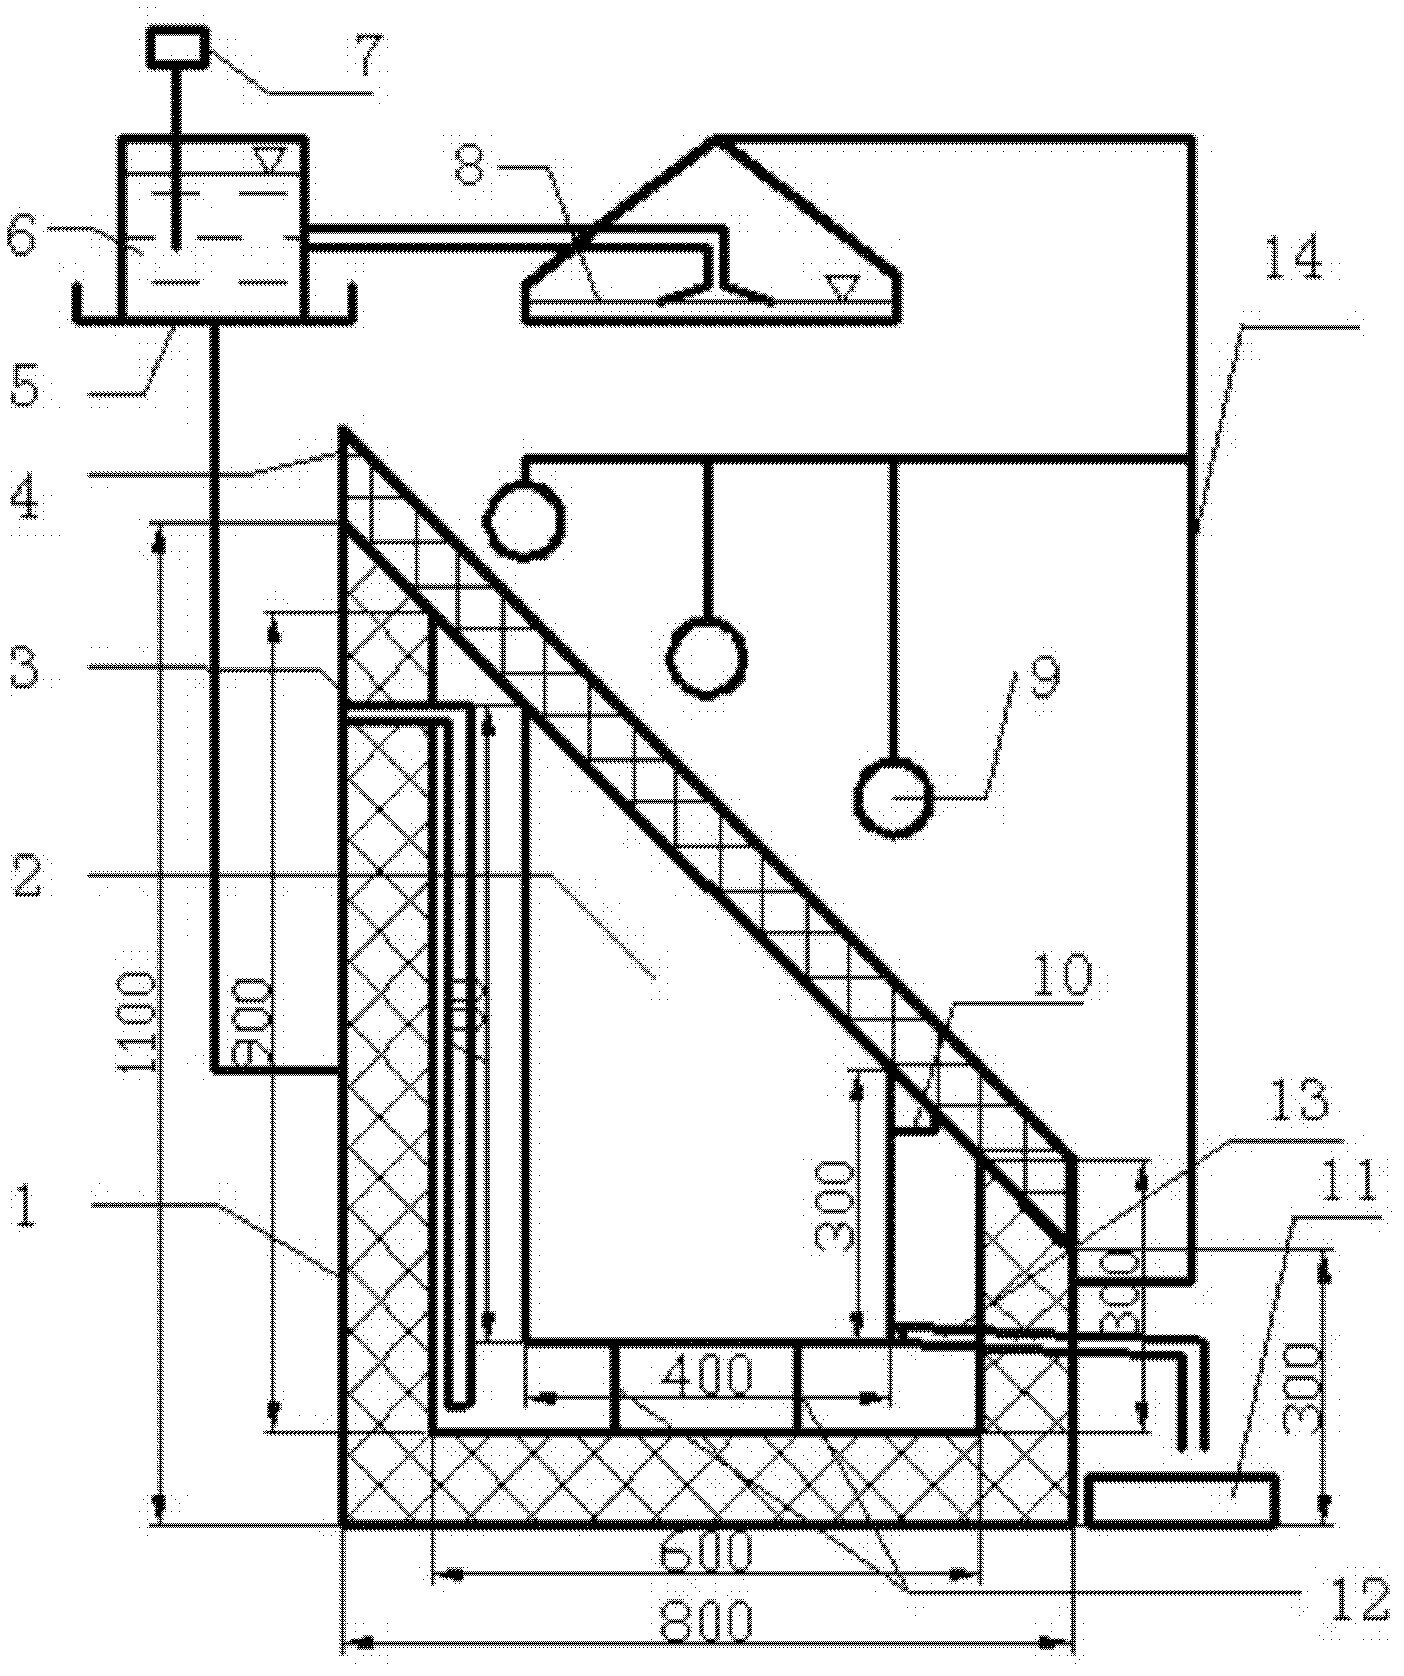 Device for testing infiltration capacity of frozen soil side slope during raining